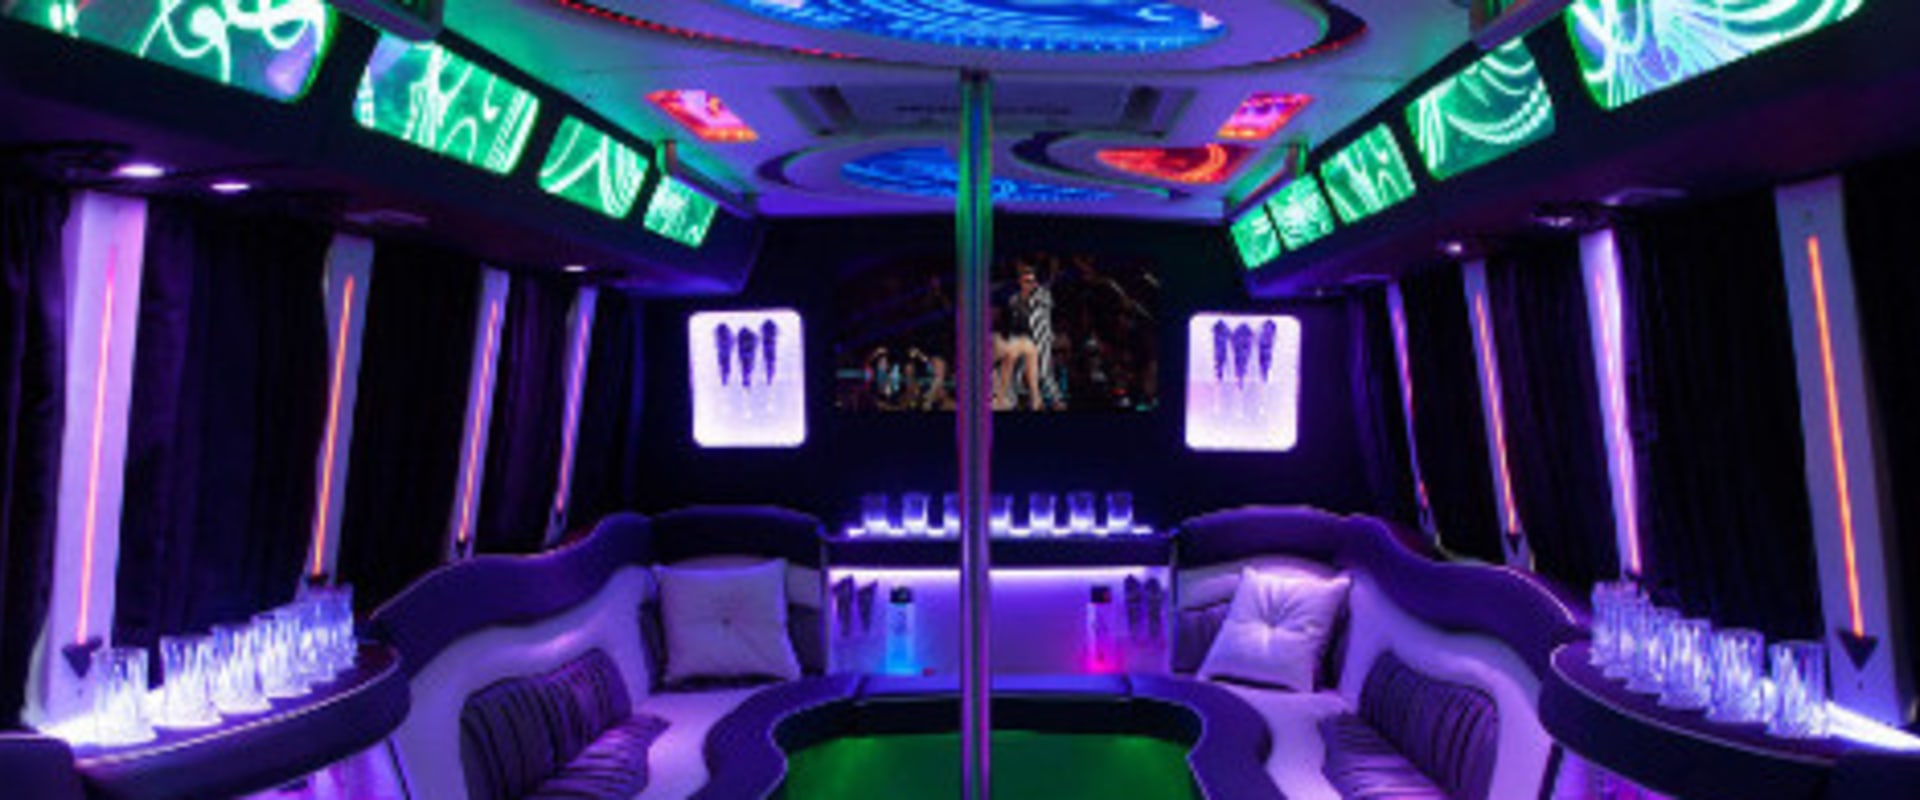 Where to rent party bus?